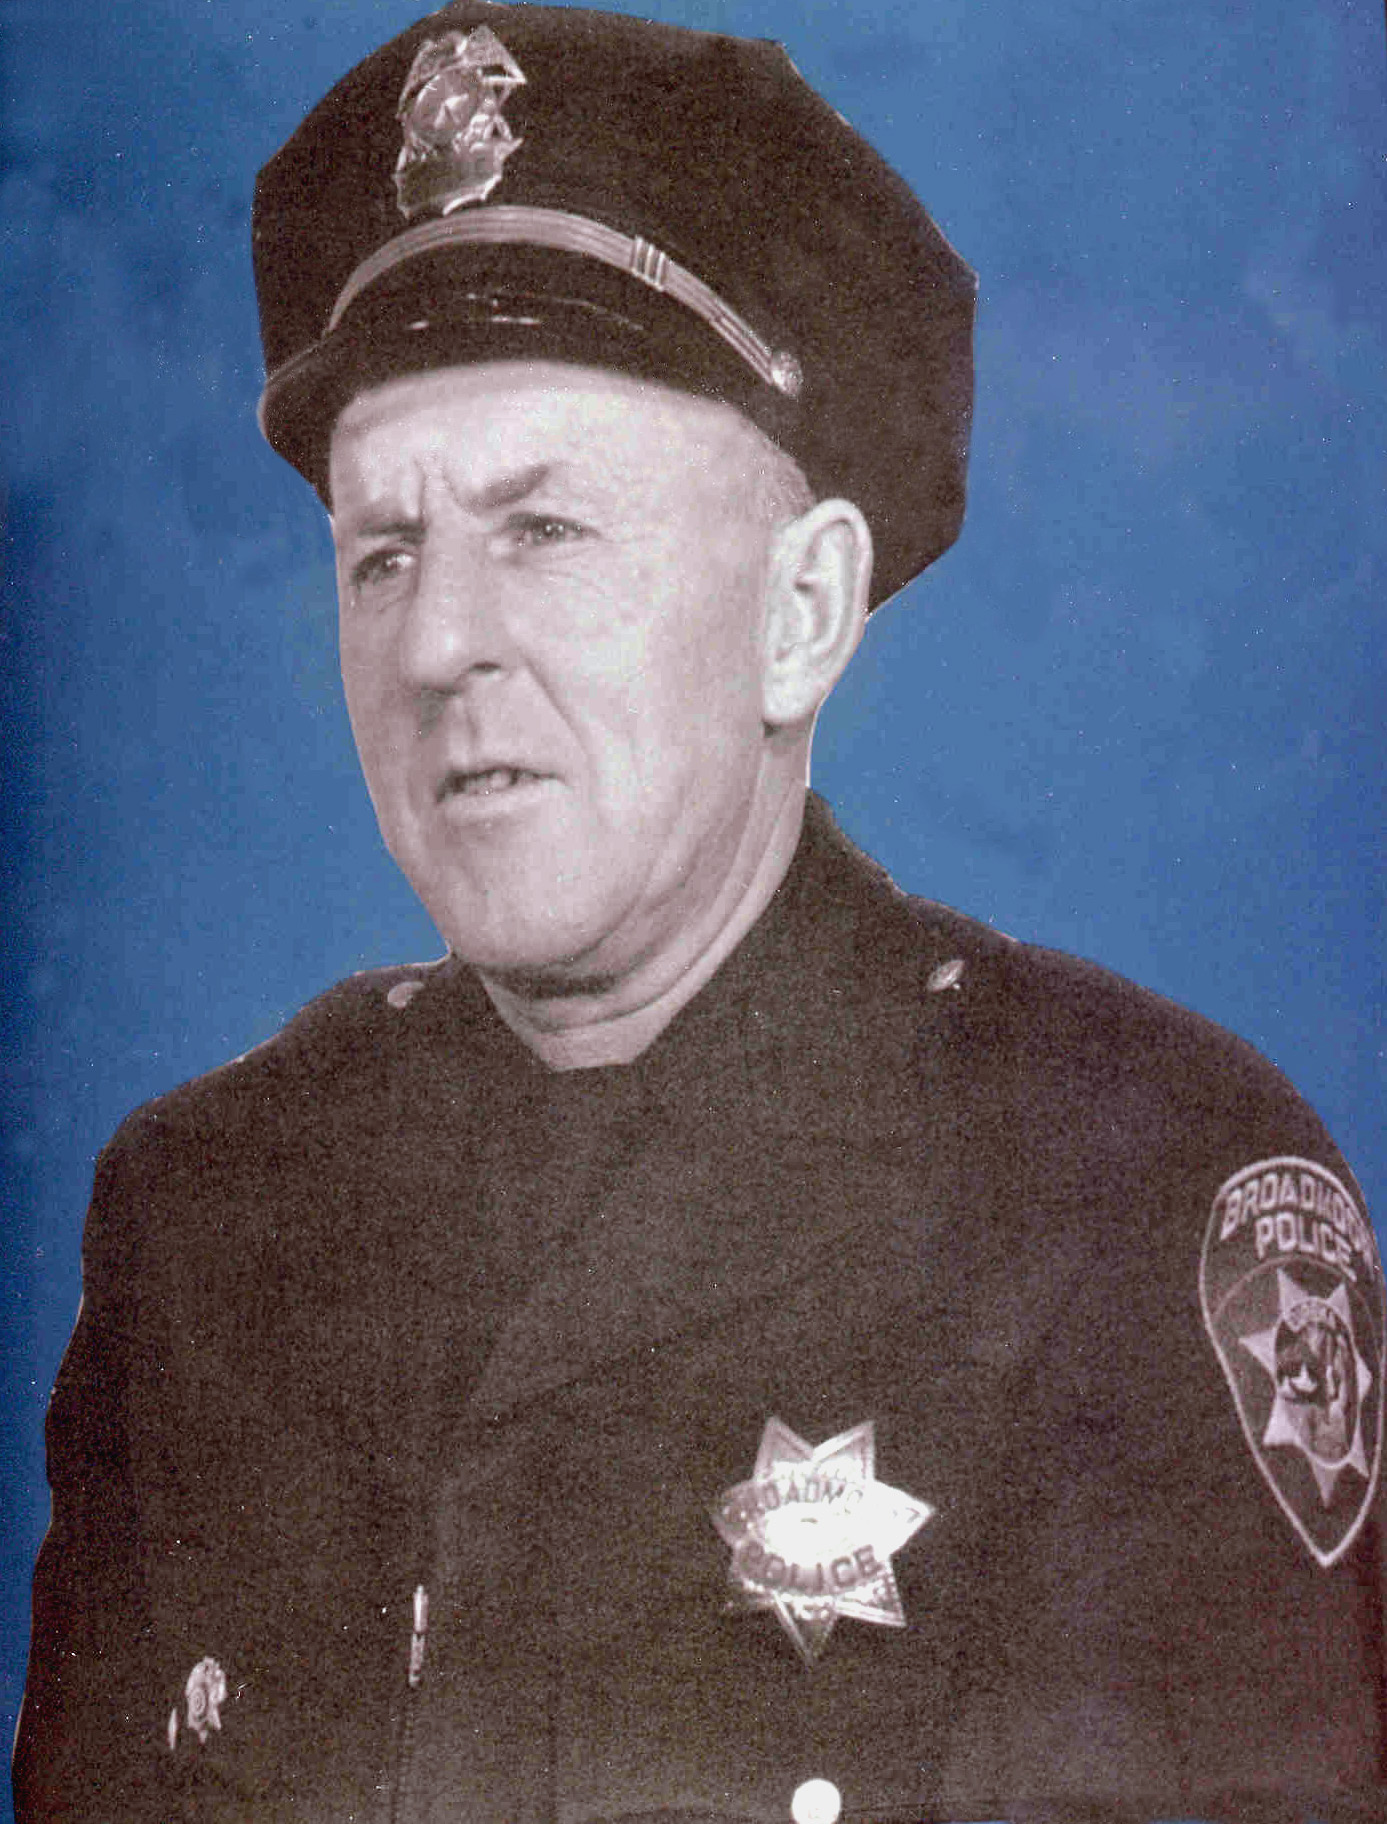 Officer Charles E. Manning | Broadmoor Police Department, California